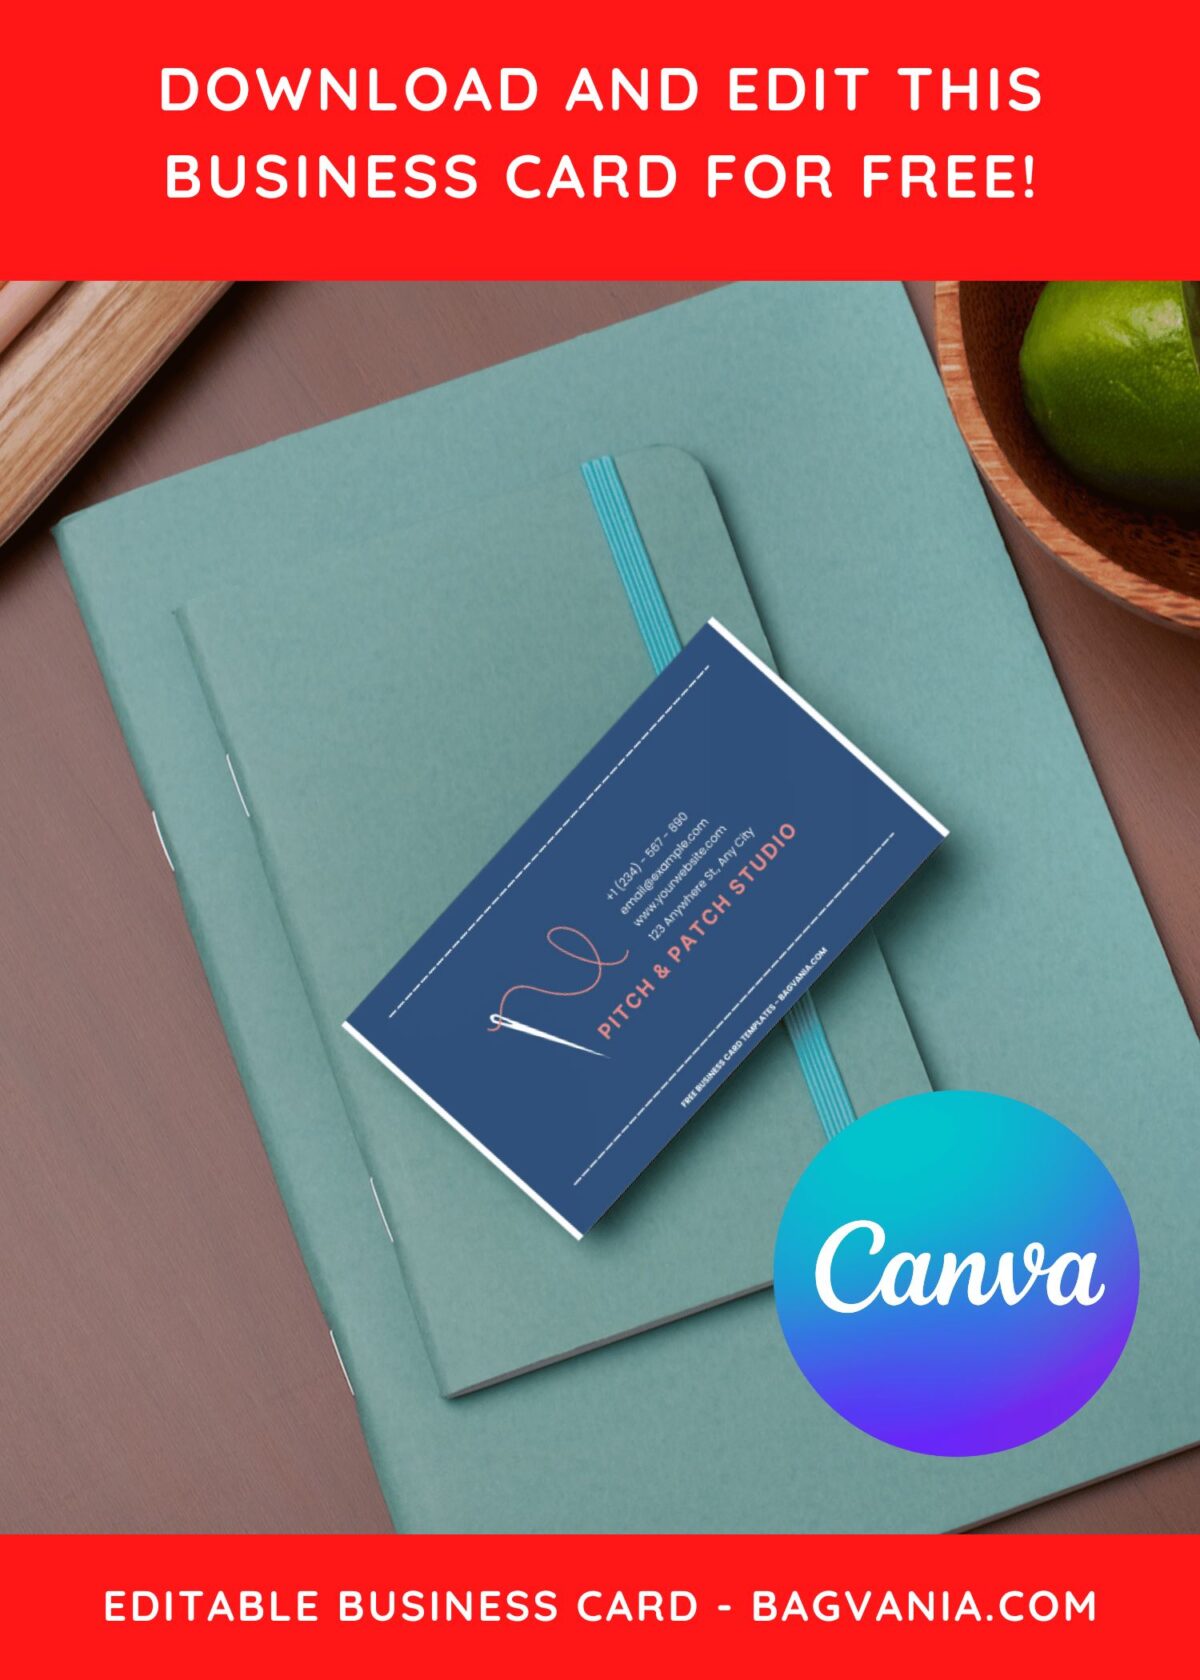 10+ Blue And White Accent Tailor Canva Business Card Templates I